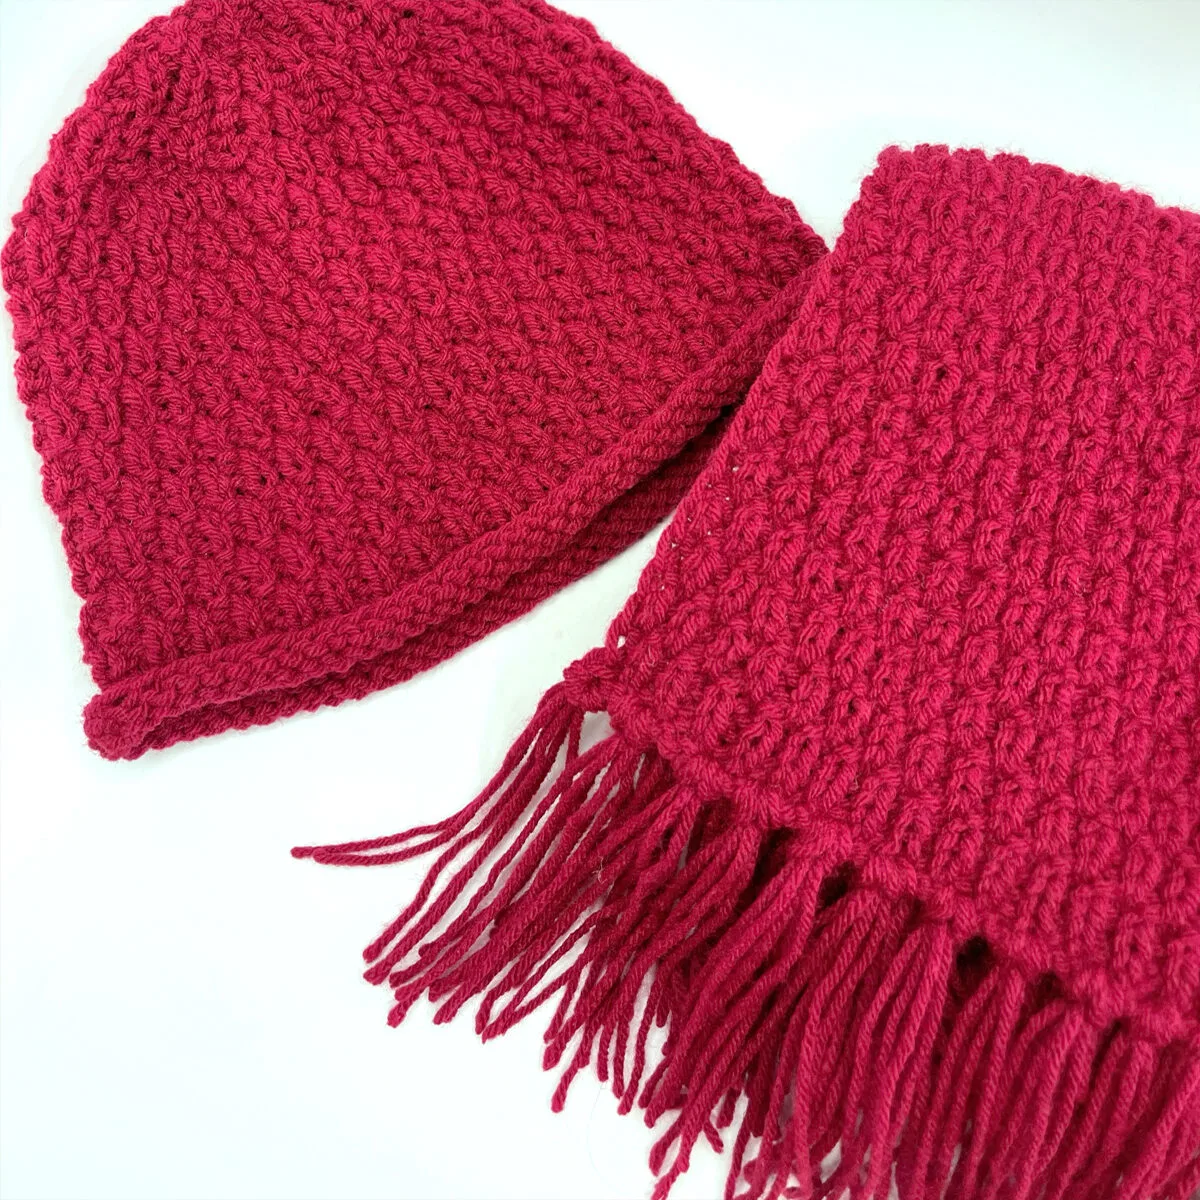 Knitted hat and scarf in burgandy red colored yarn.